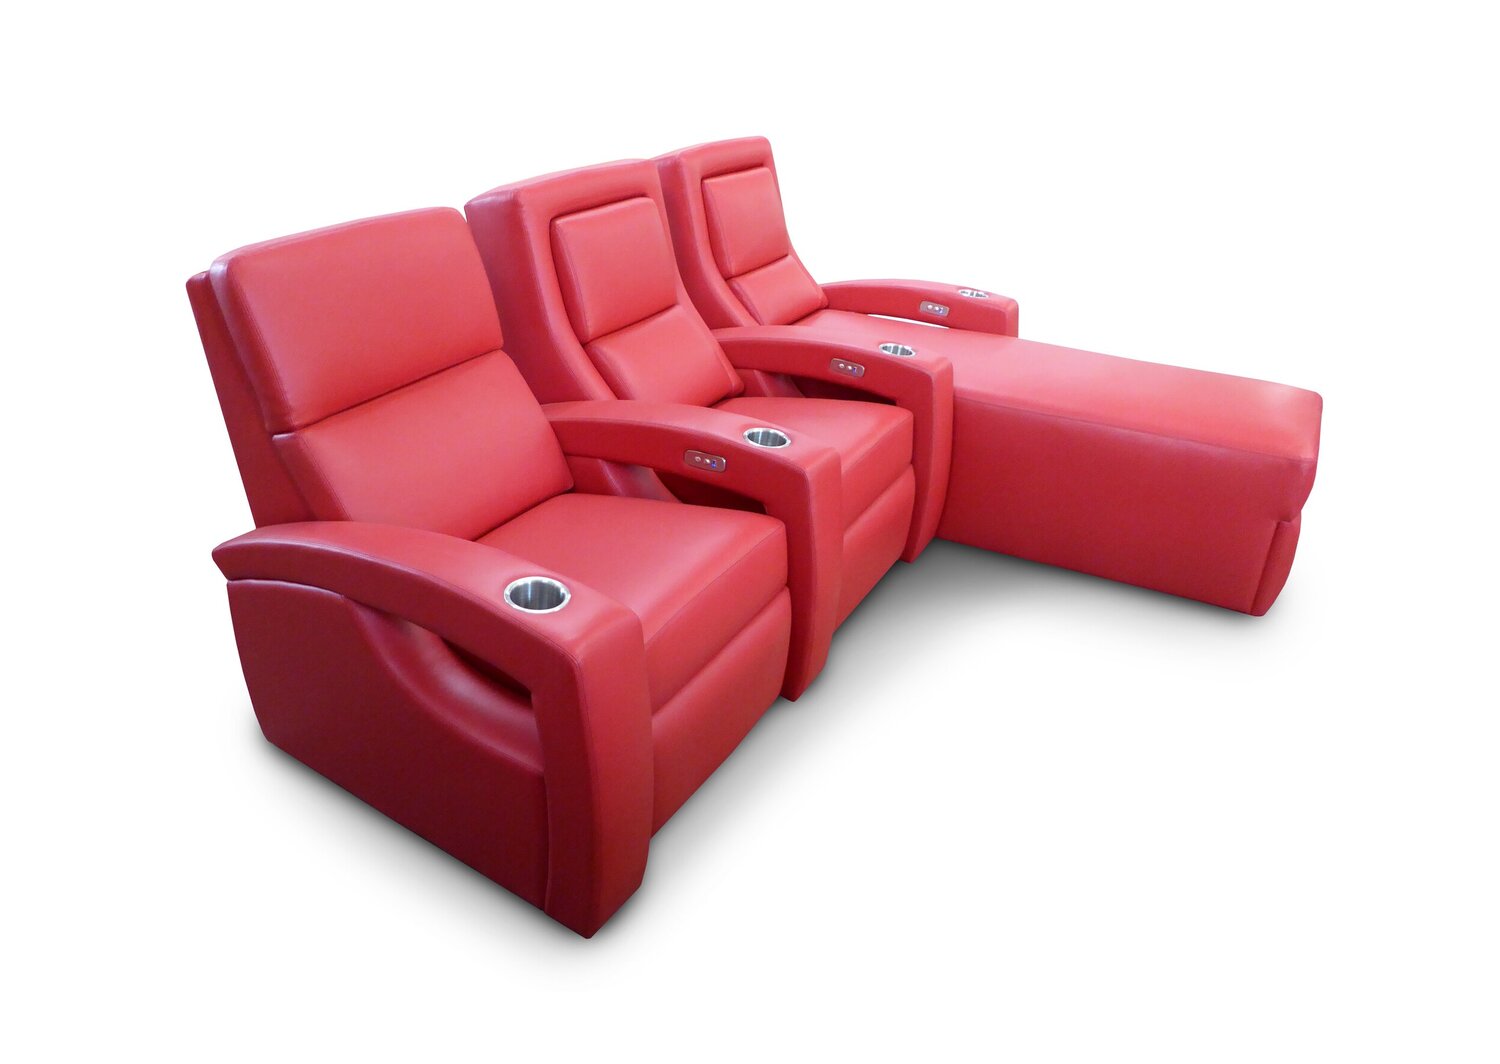 Fortress Seating Crosstown